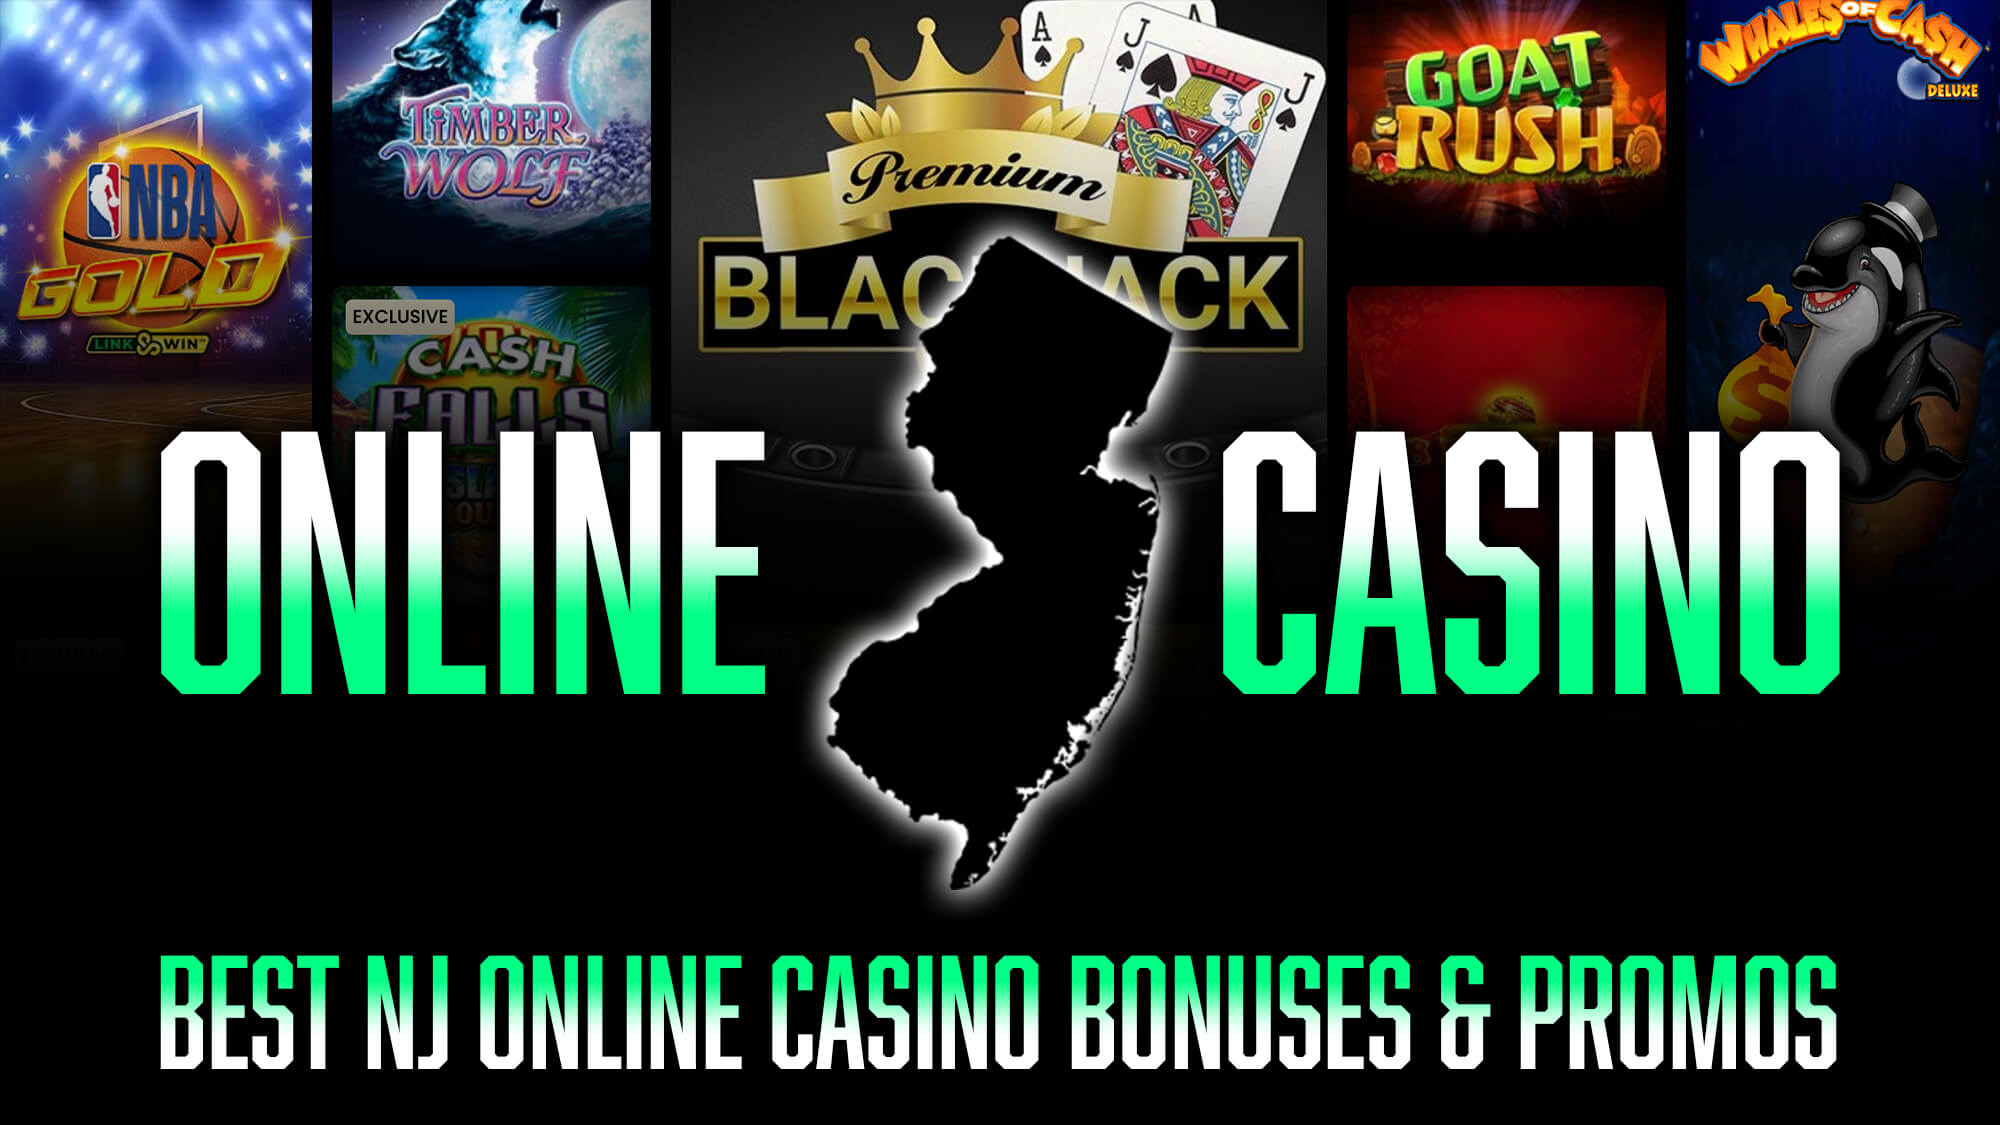 7 Life-Saving Tips About casino online